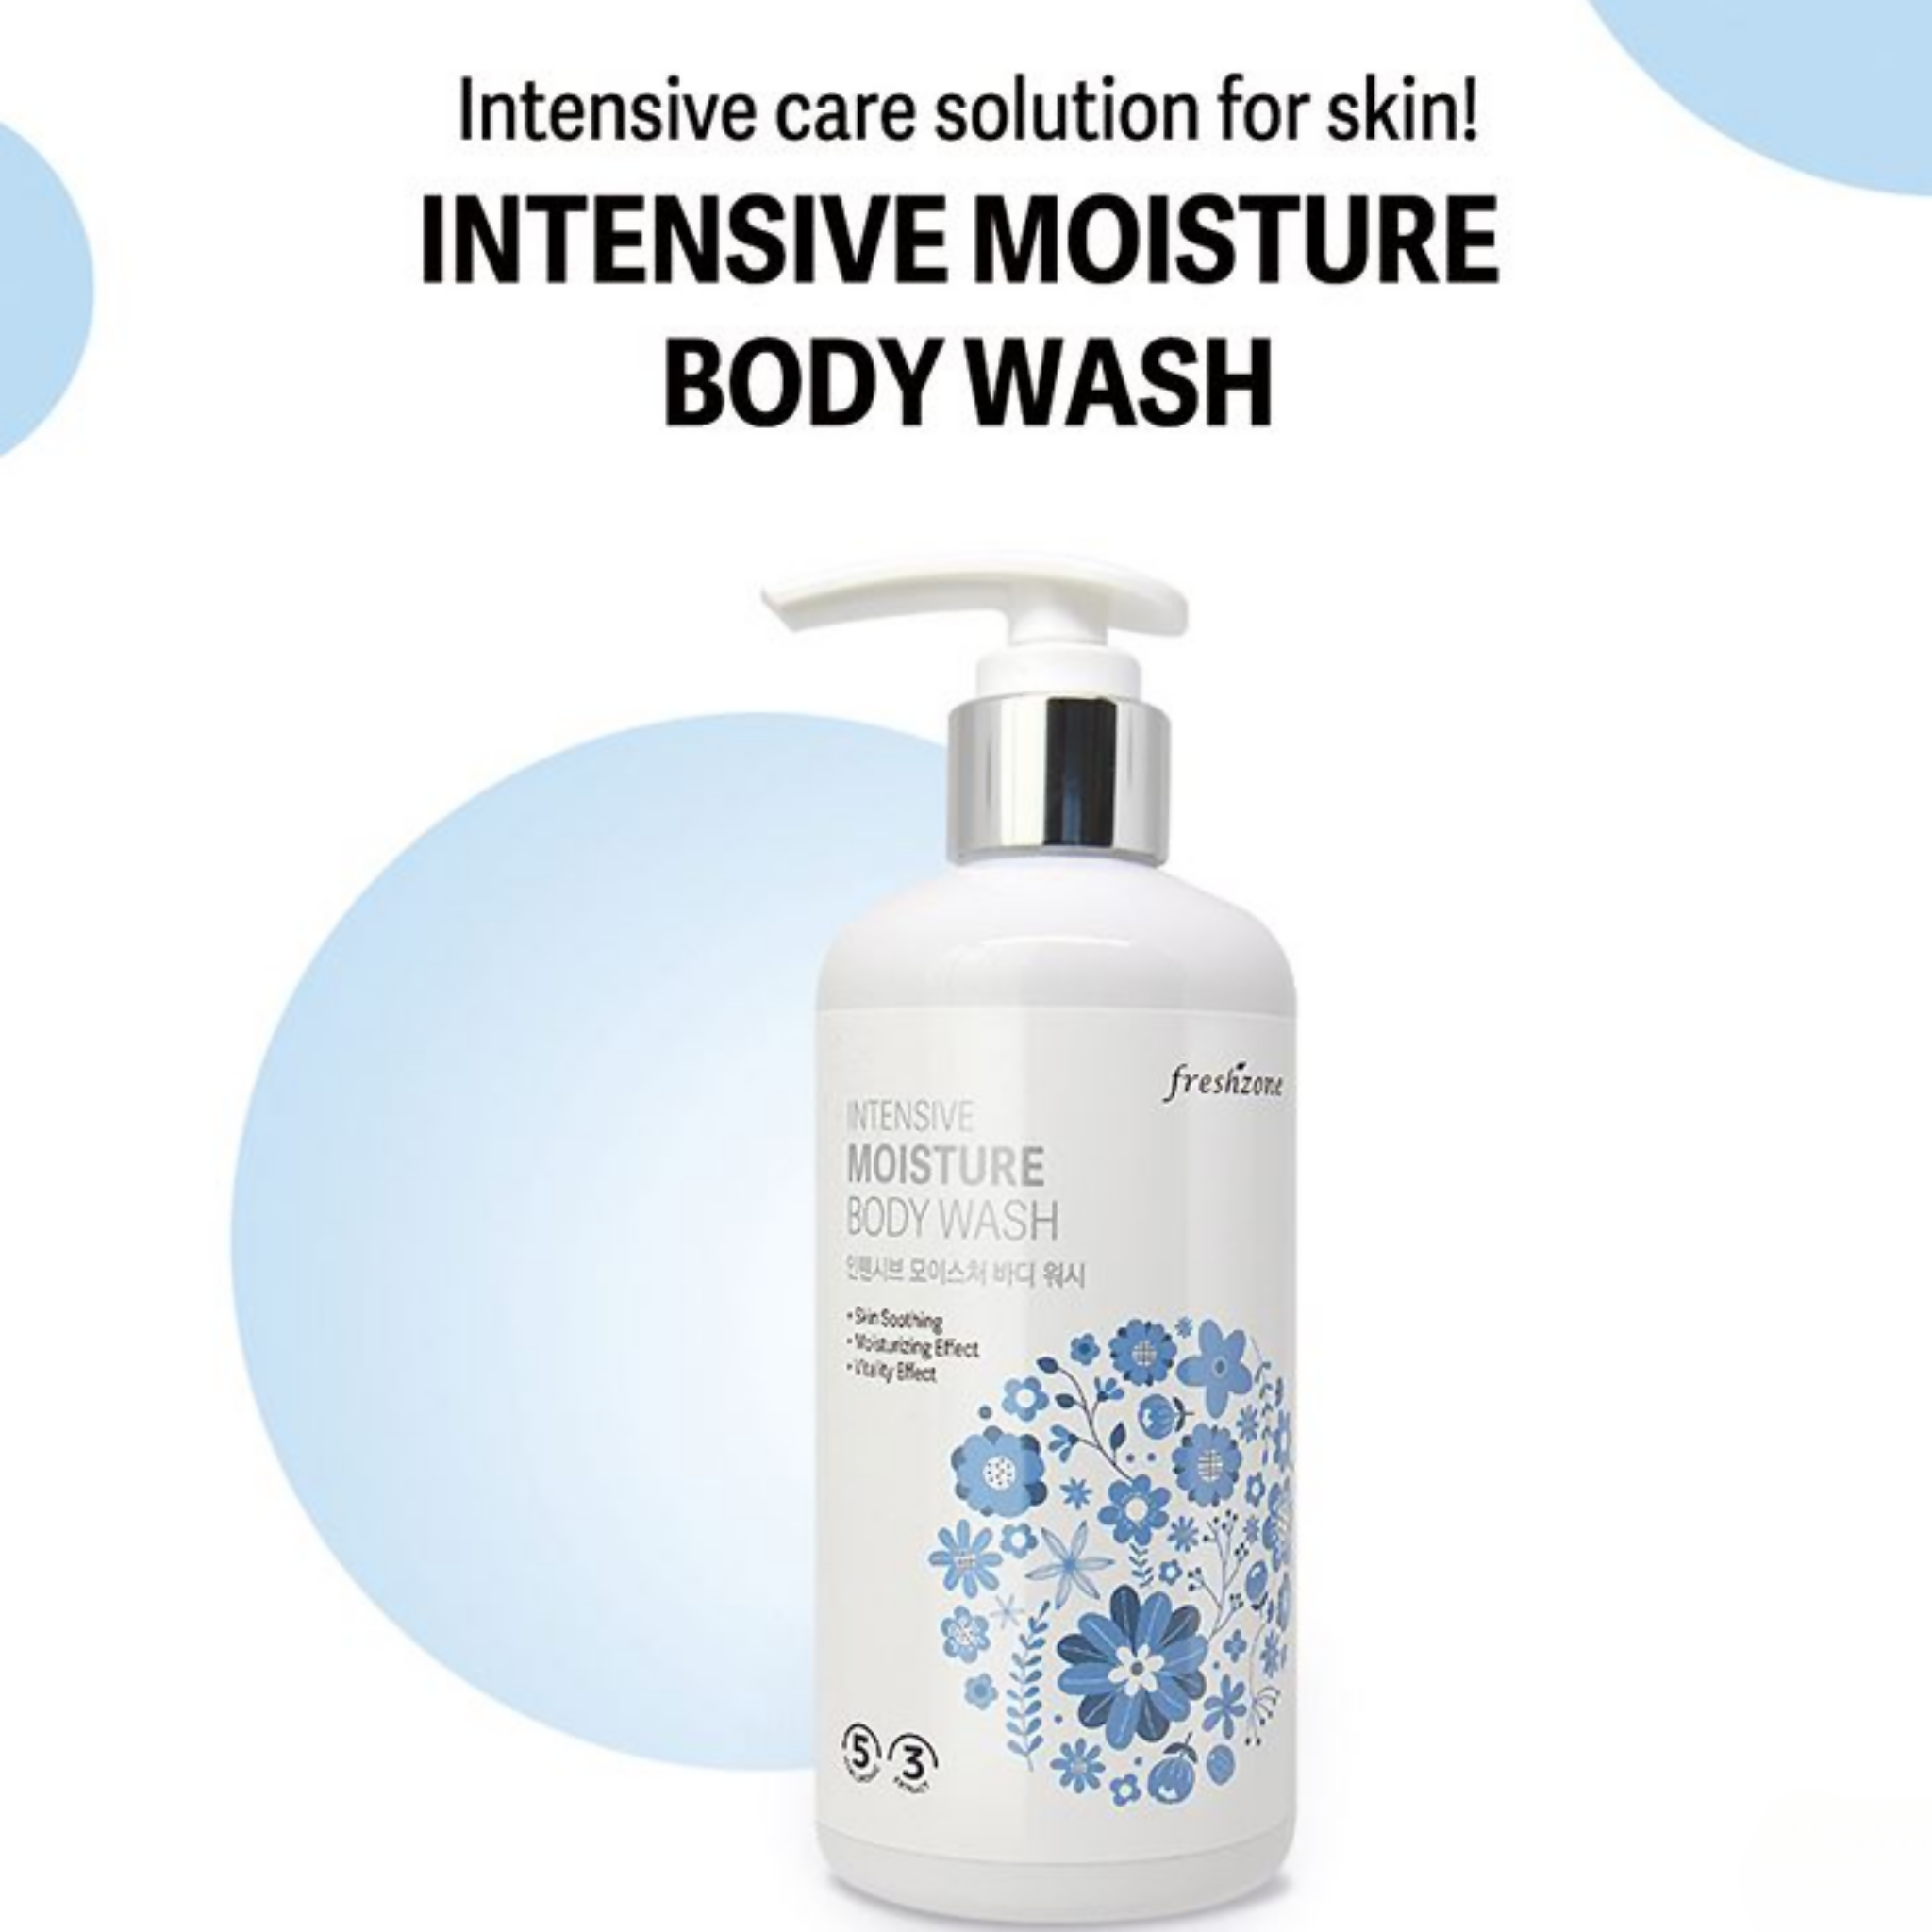 Intensive Moisture Body Wash, Snail Mucus & Hyaluronic Acid Infused, for Elasticity